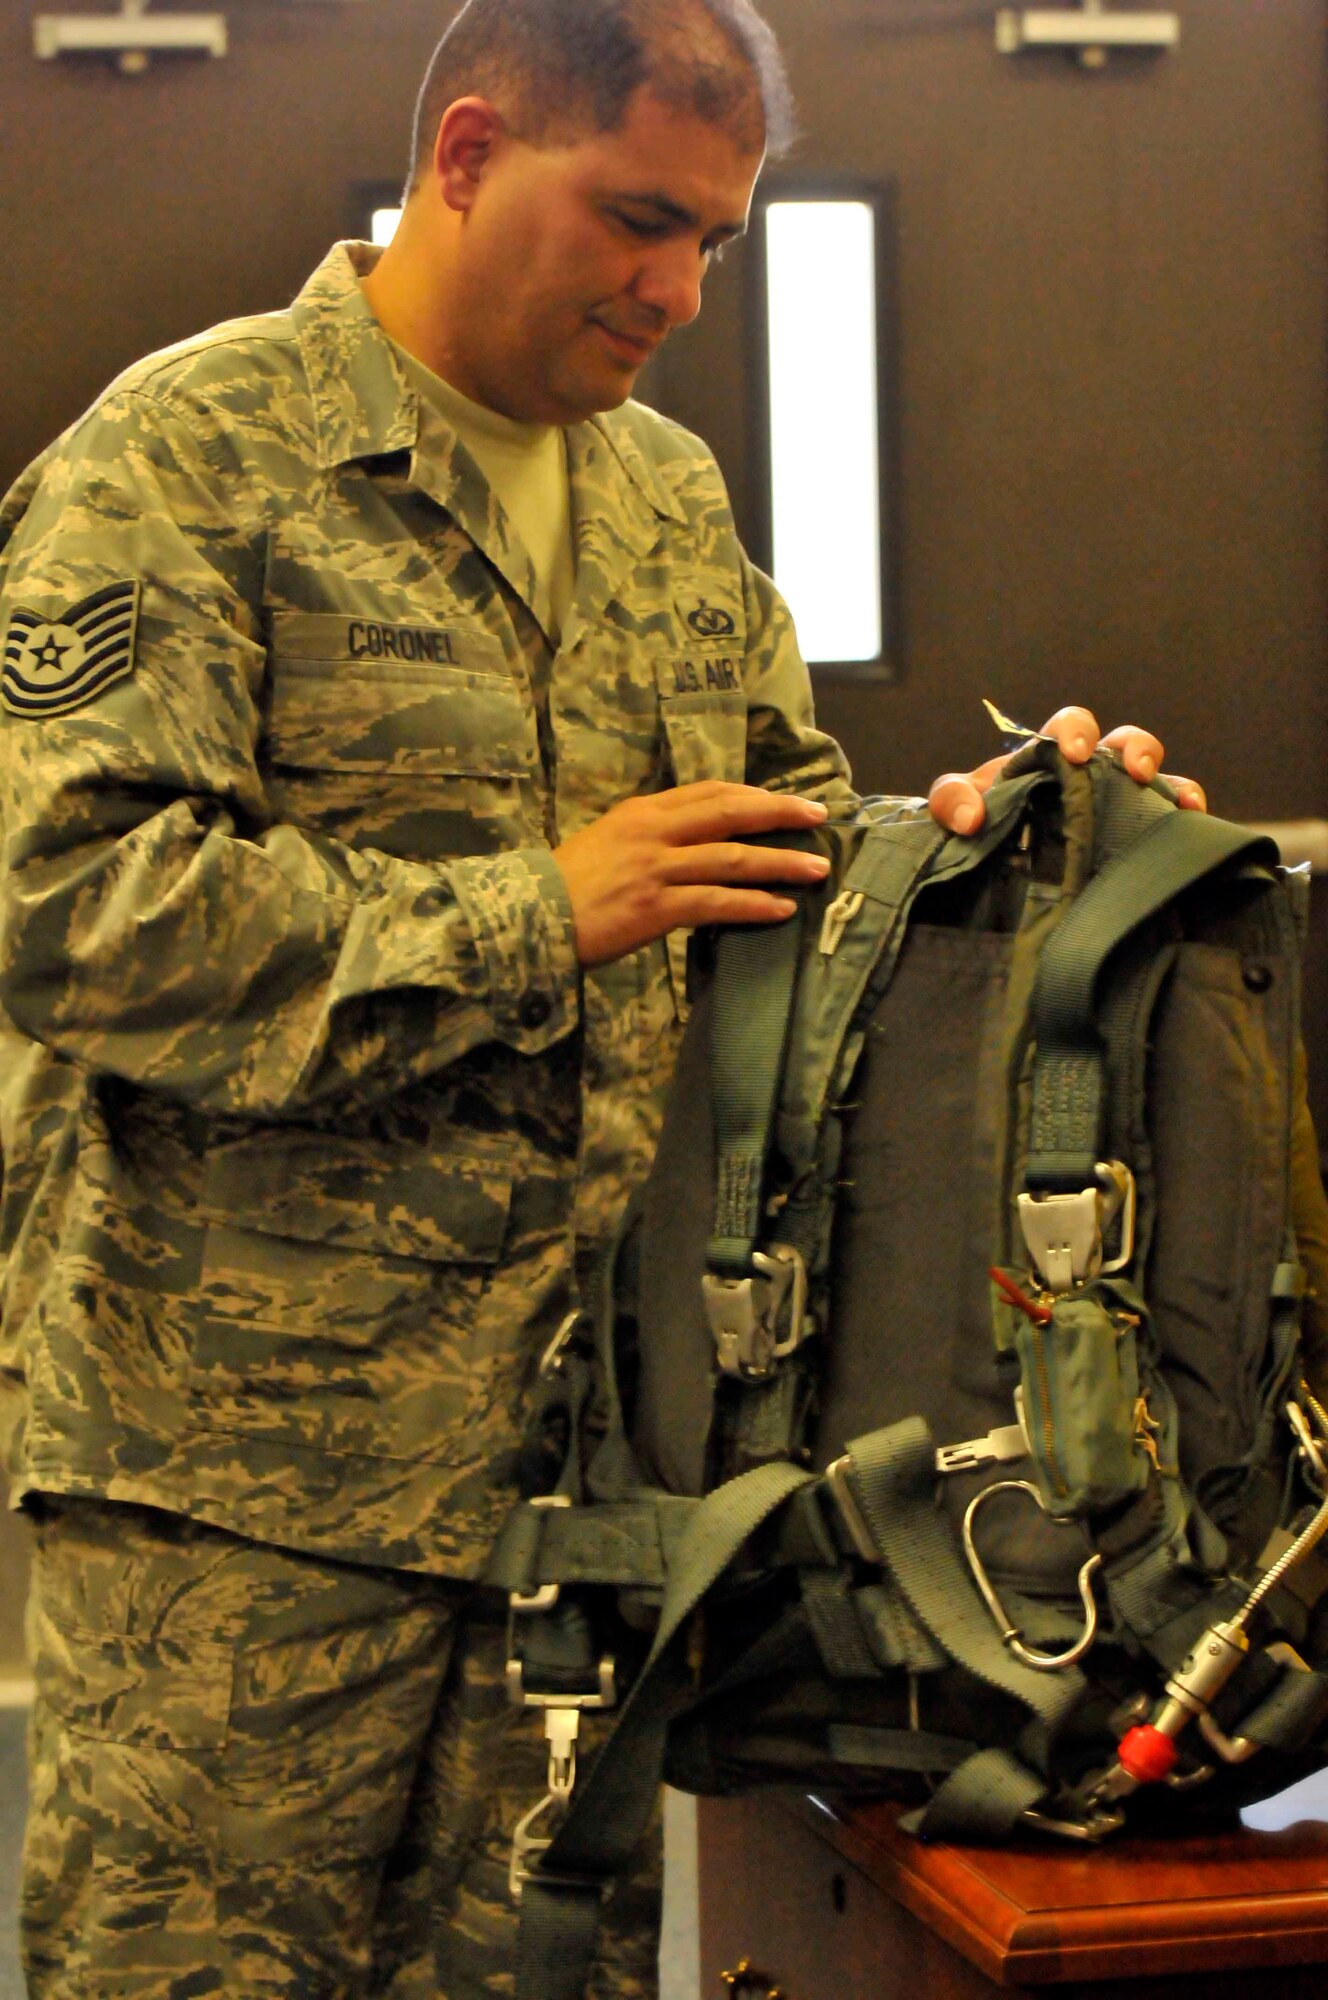 PATRICK AIR FORCE BASE, Fla. - Tech. Sgt. Xavier Coronel, aircrew flight equipment specialist, 920th Operations Support Squadron, inspects a parachute pack prior to placing it in the HC-130 King aircraft for use by the pararescuemen for the Cocoa Beach Air Show demonstration Nov. 4-5. AFE specialists typically take about 30 minutes to prepare the aircraft for the next day following a flight. (U.S. Air Force Photo/Capt. Ryan Liss)